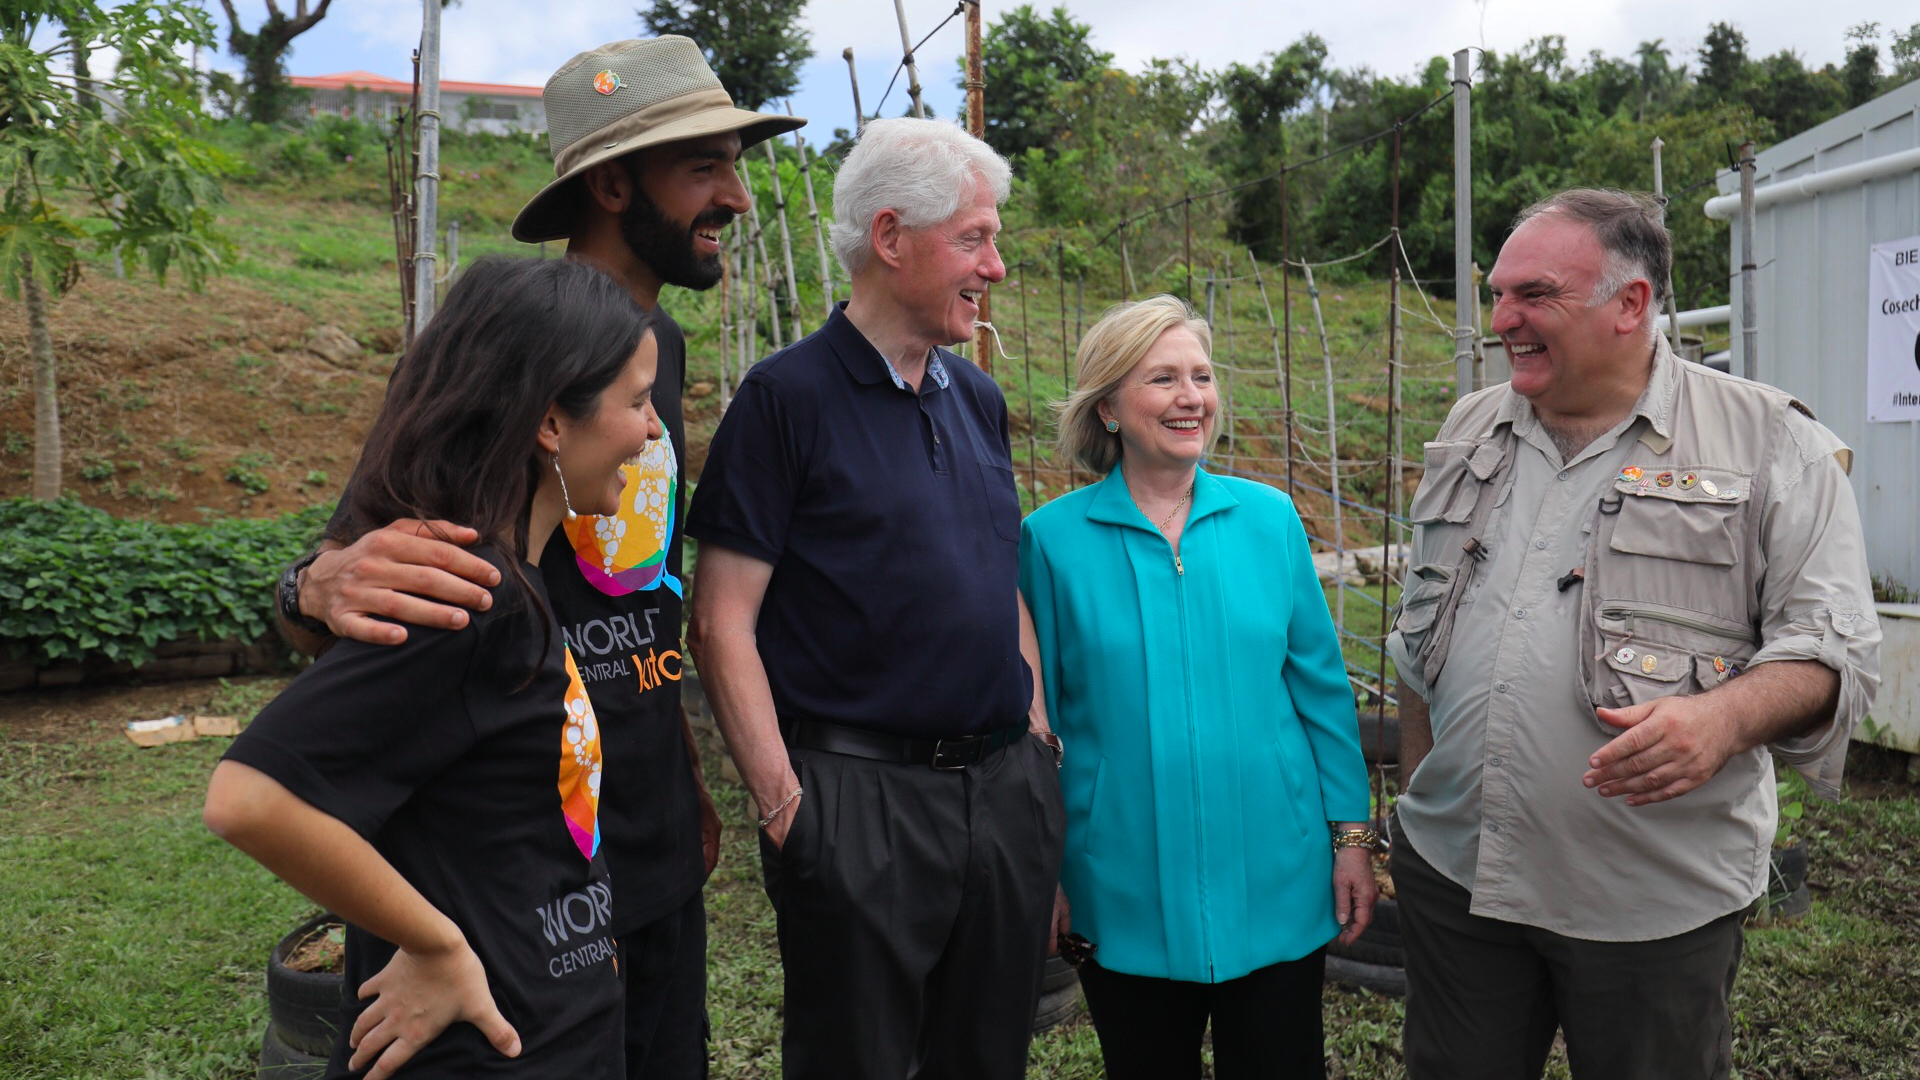 The Clintons with Jose Andres